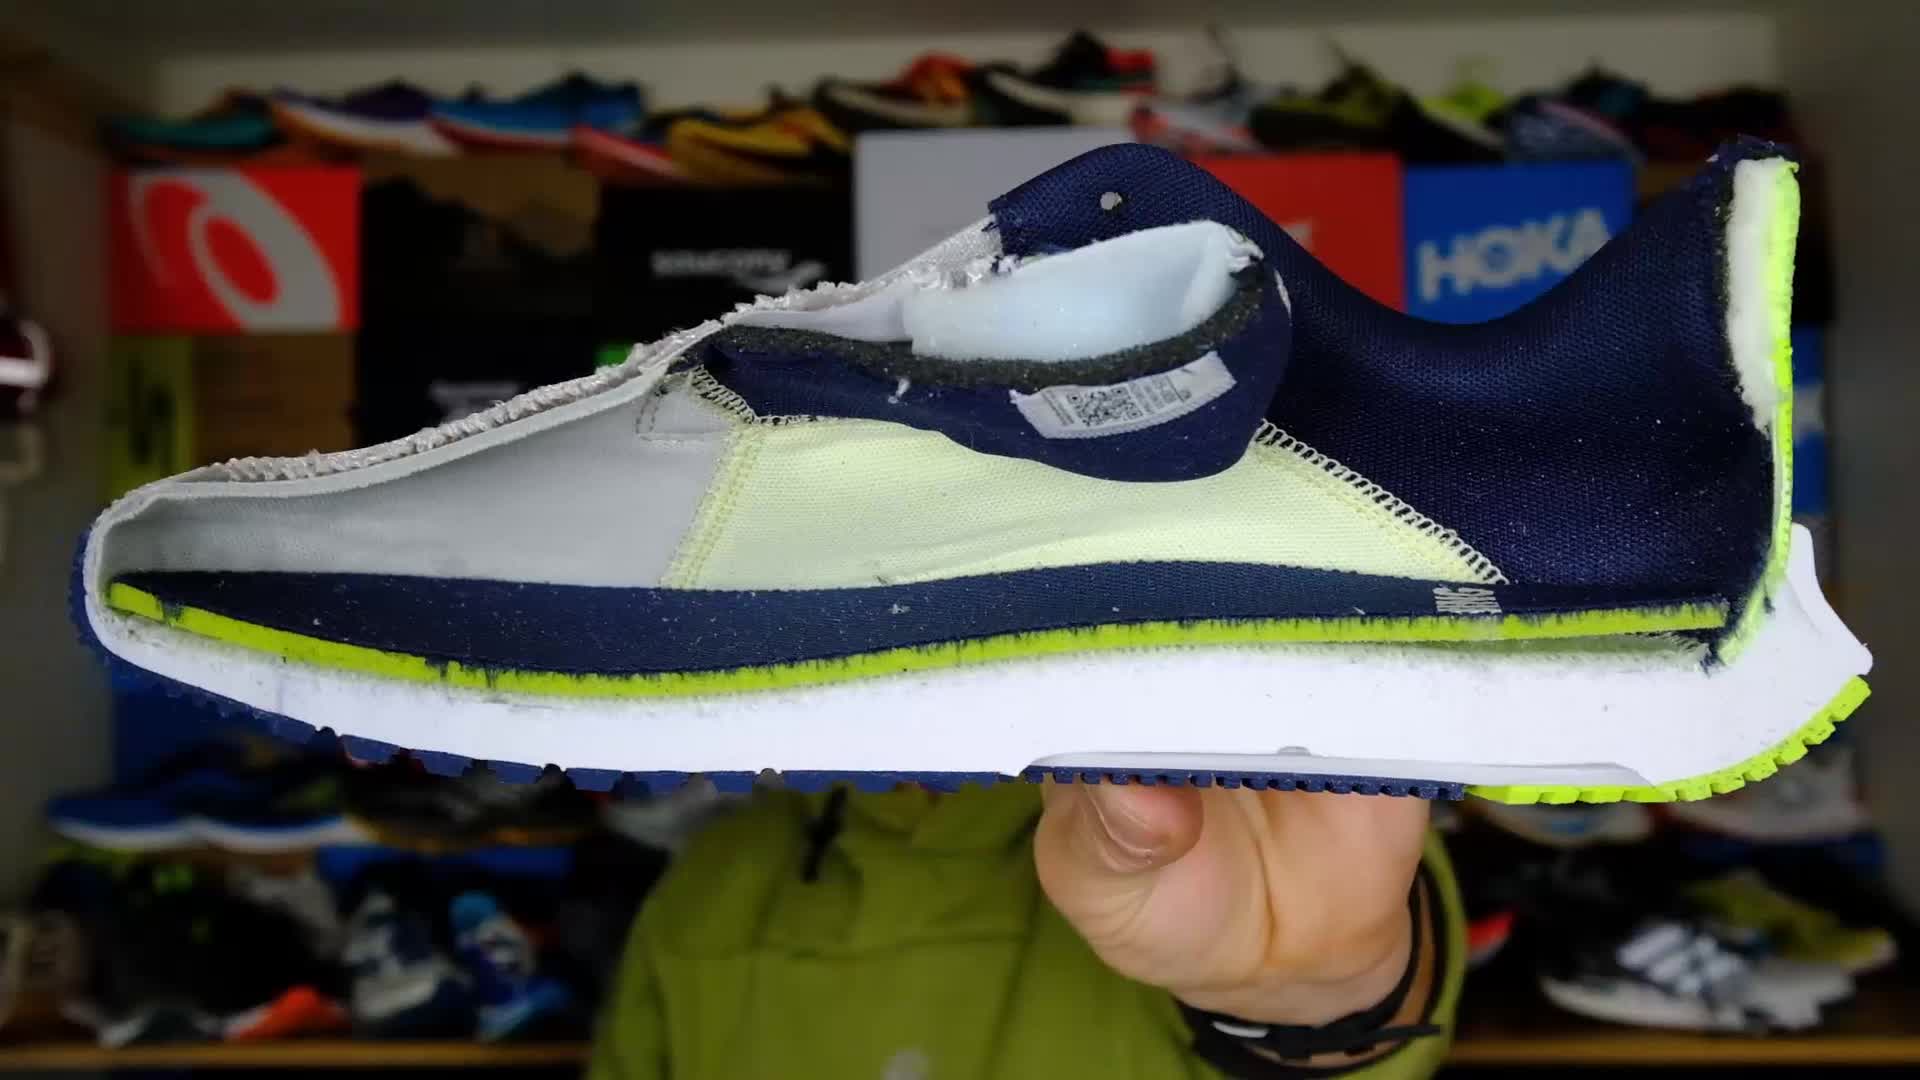 Cut in half: Nike Quest 4 Review